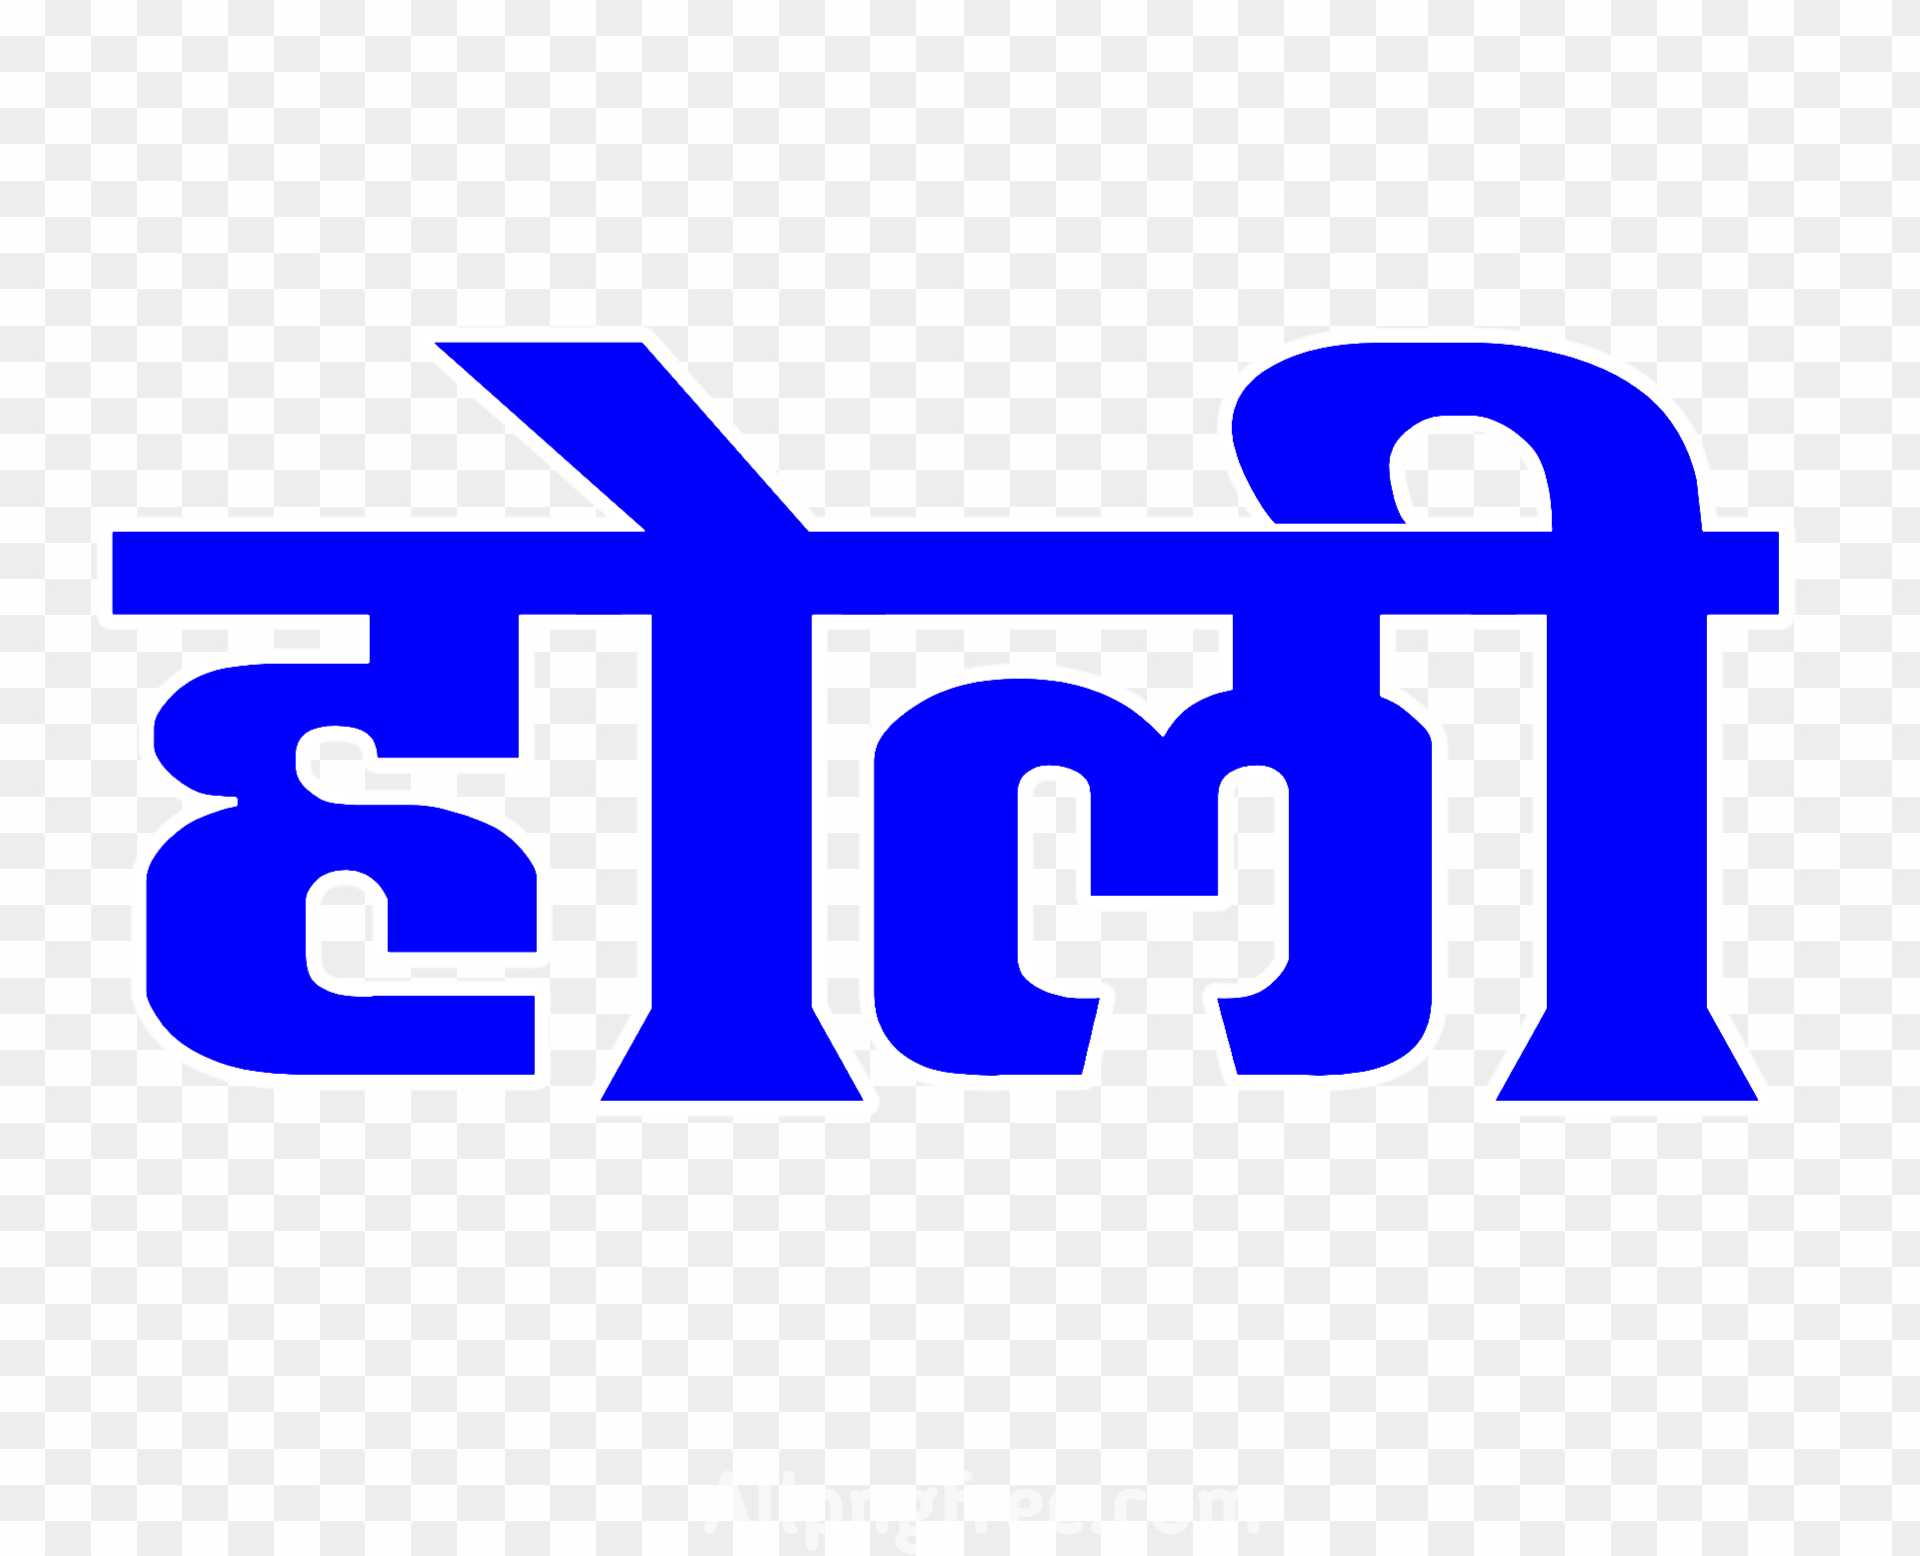 Holi in hindi text PNG images download